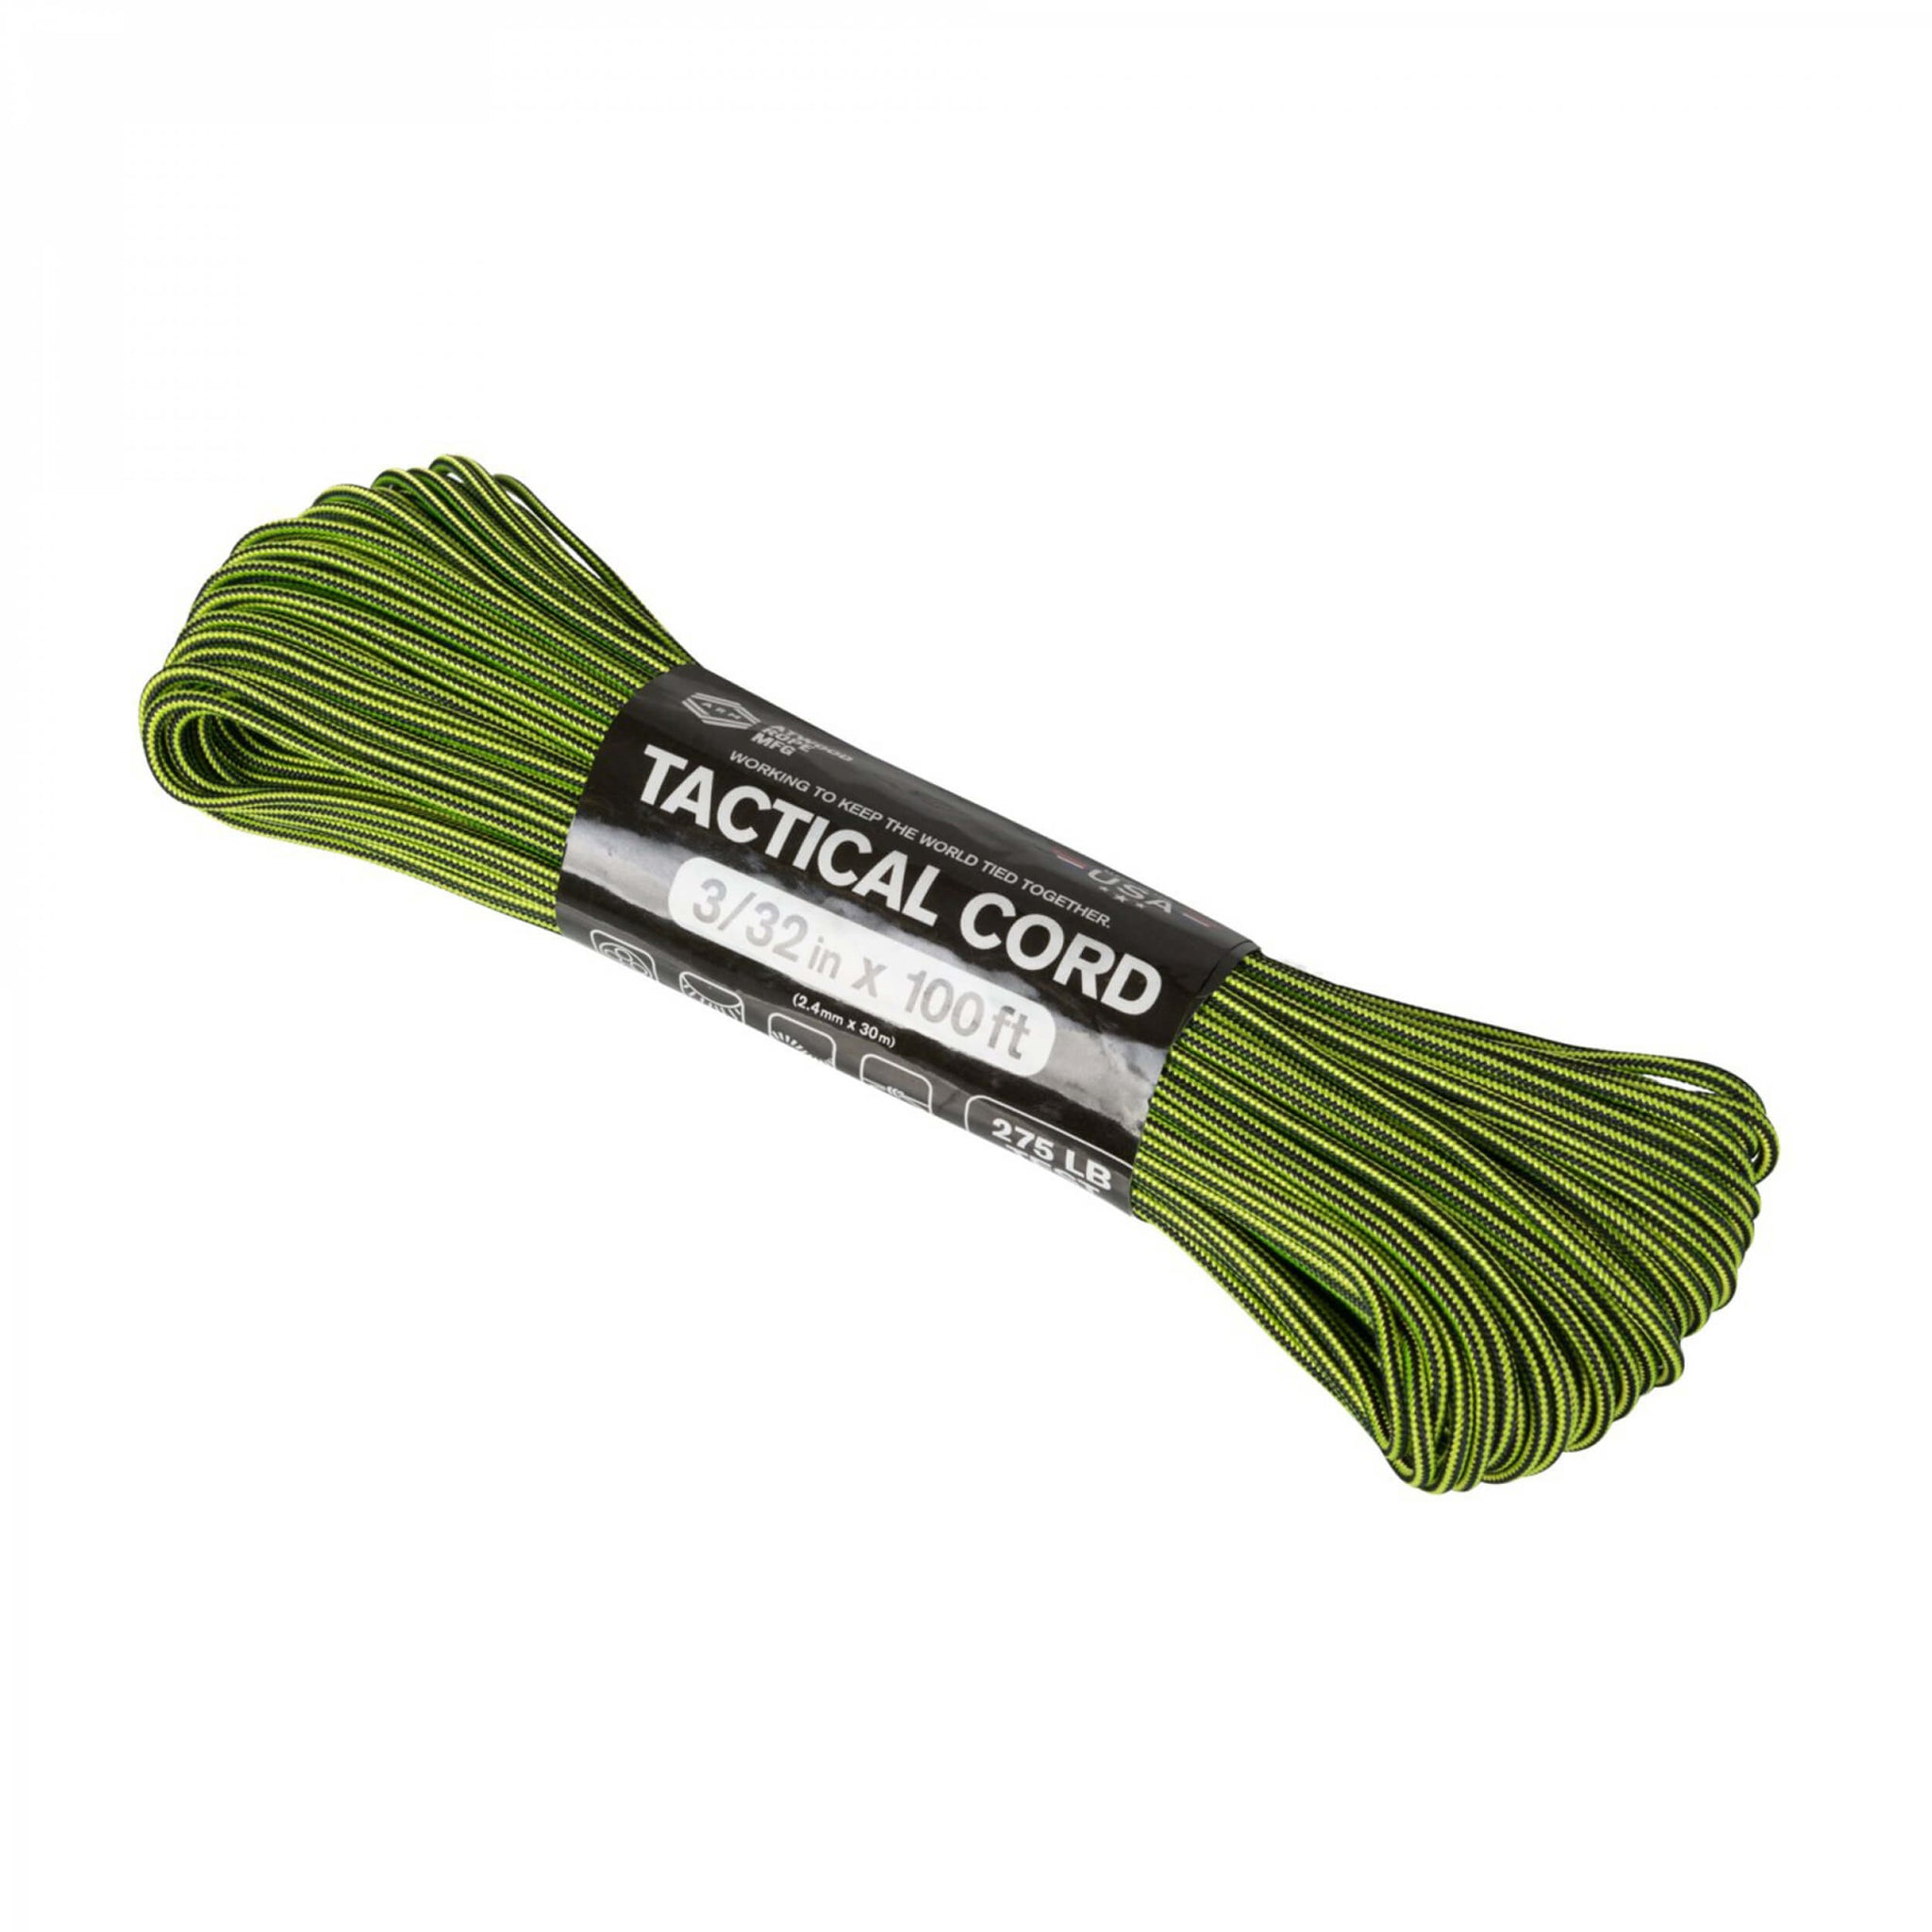 Atwood Rope 275 Tactical Cord (100 ft / 30 m) neon yellow & black stripes